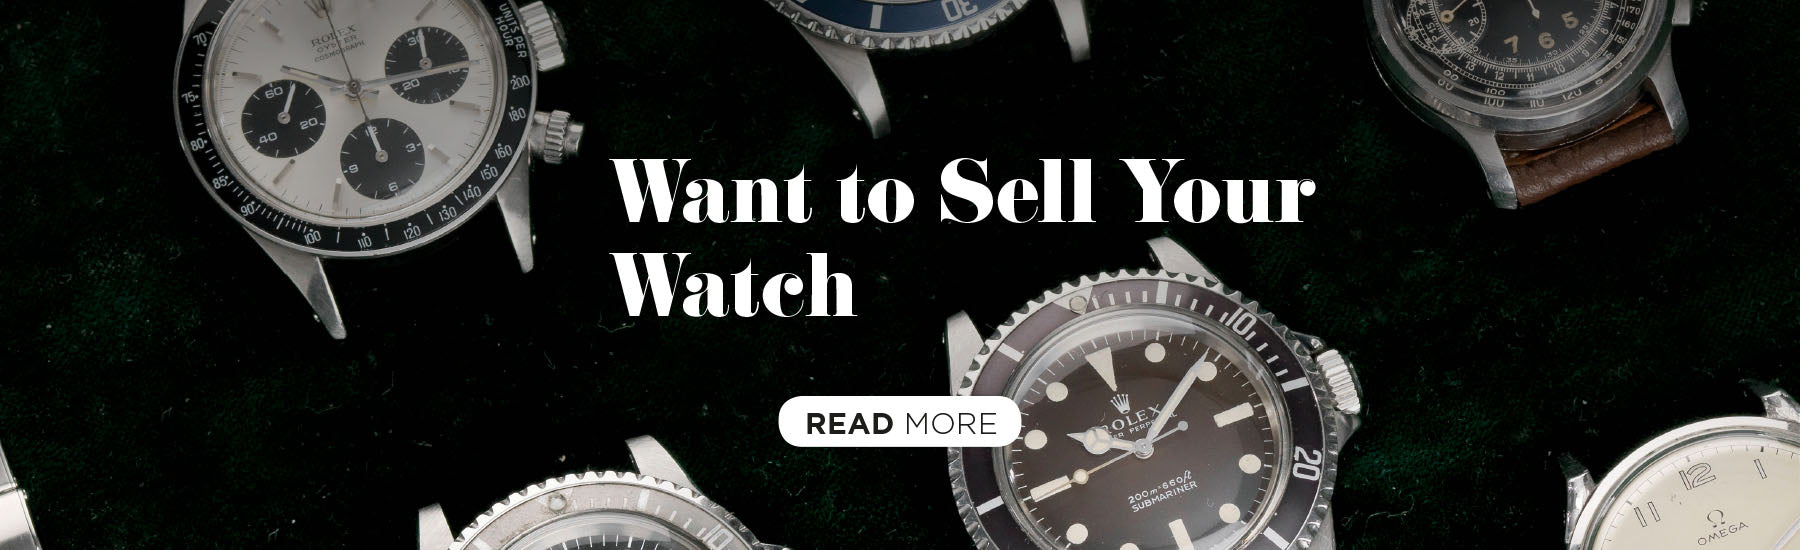 Want-to-sell-you-watch-banner-Magazine-C